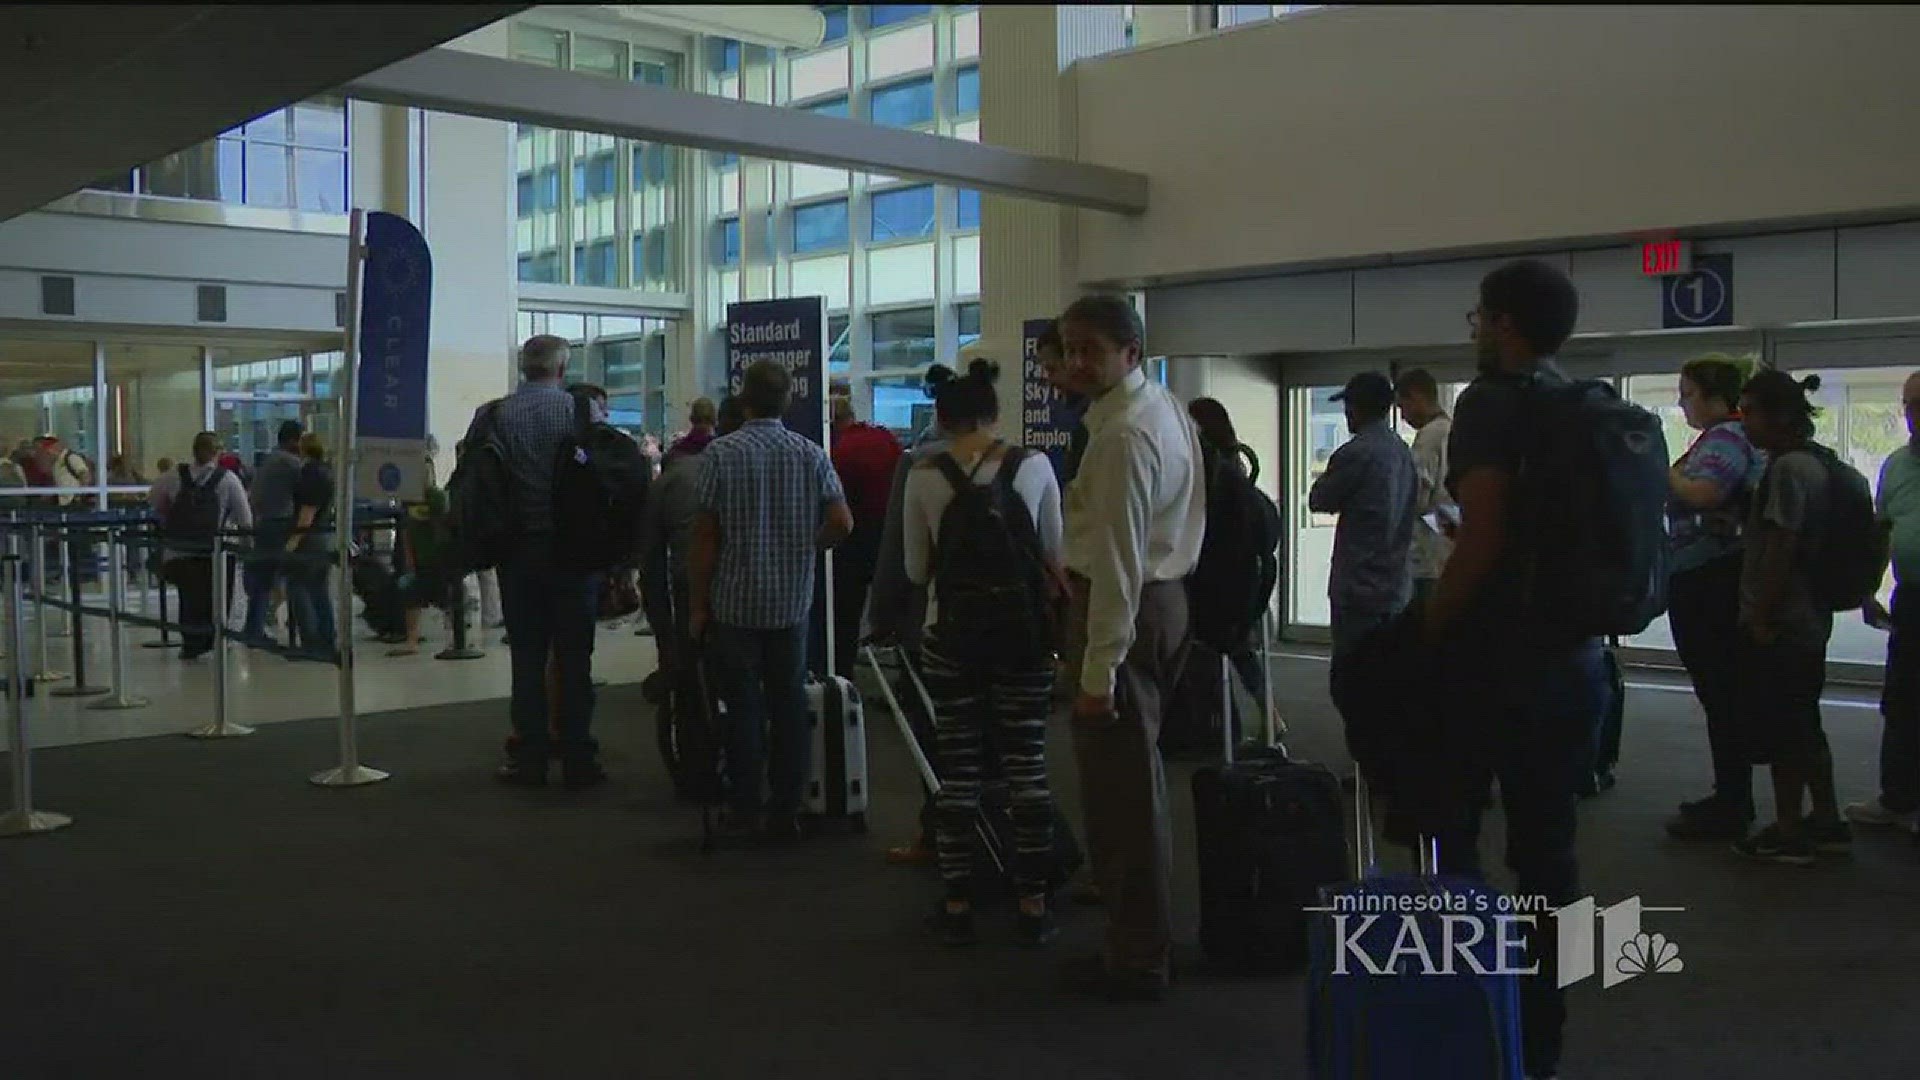 Those traveling in the next few weeks may see longer wait times at the airport as one of the security checkpoints at MSP Terminal 1 begins a partial closure for construction. http://kare11.tv/2wkDMkI